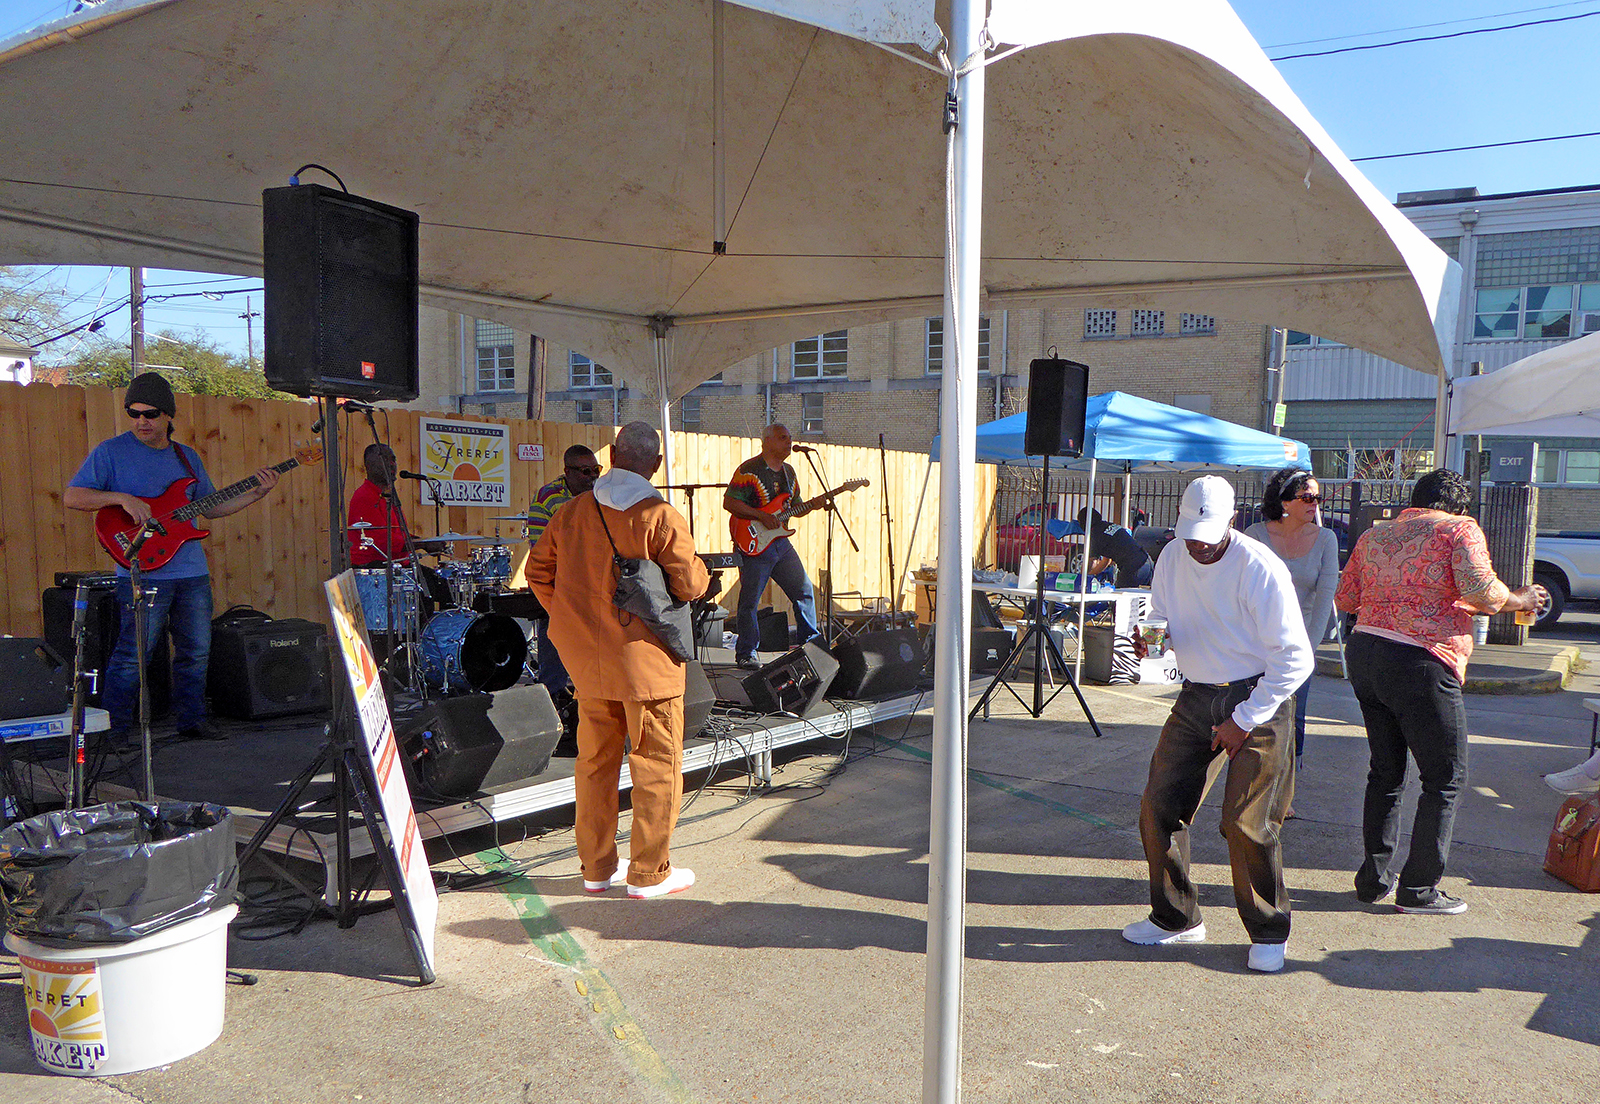 People dancing to live music at the Freret Street Market.